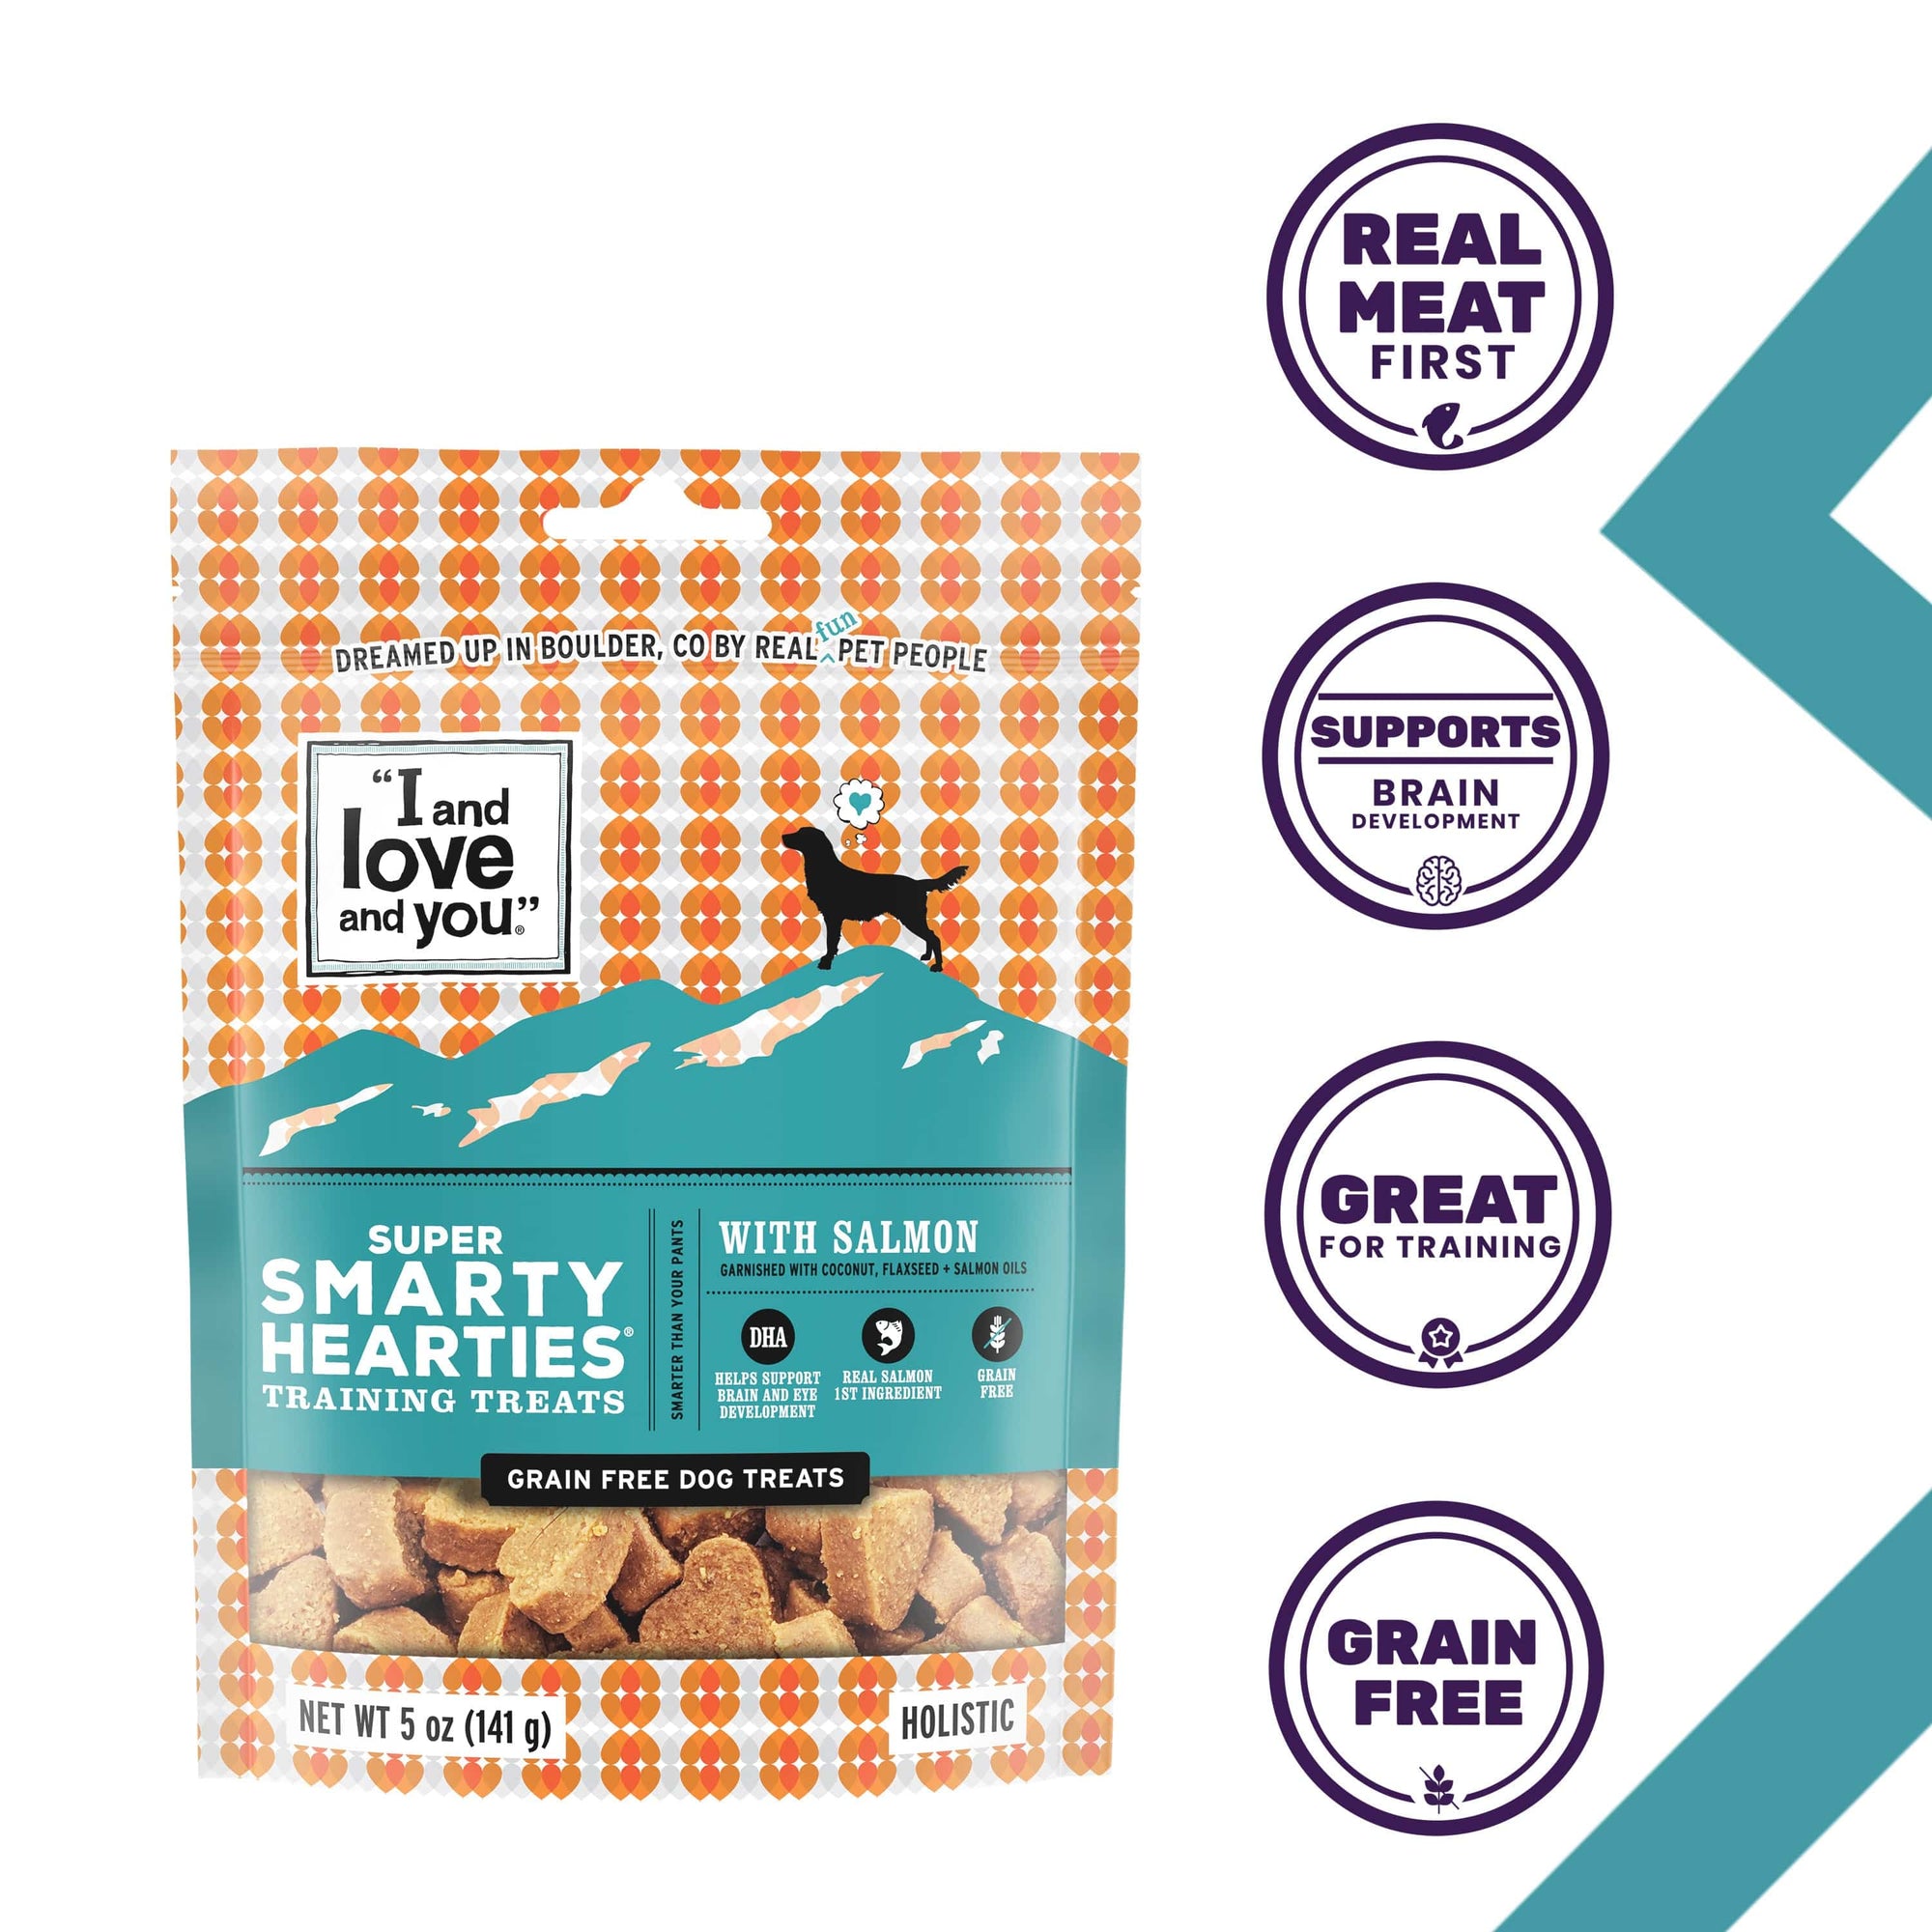 Super Smarty Hearties dog treats bag with a dog silhouette, meat company logo, and brain development circle.